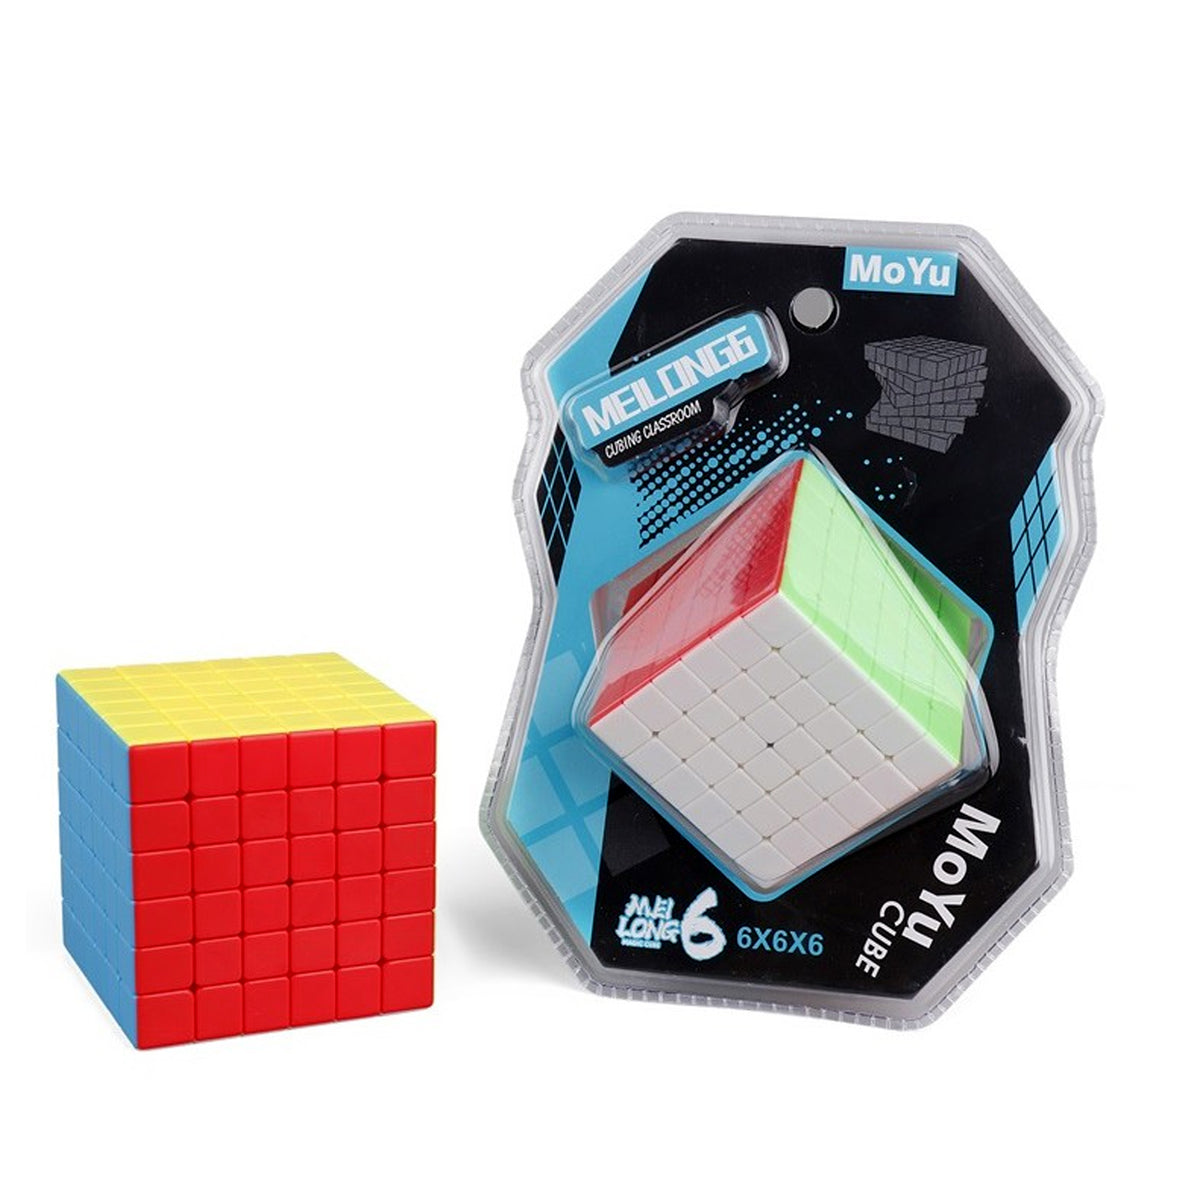 Cubing Classroom Magic Cube Toys-MF8952: Perfectly Engineered for Puzzle Enthusiasts